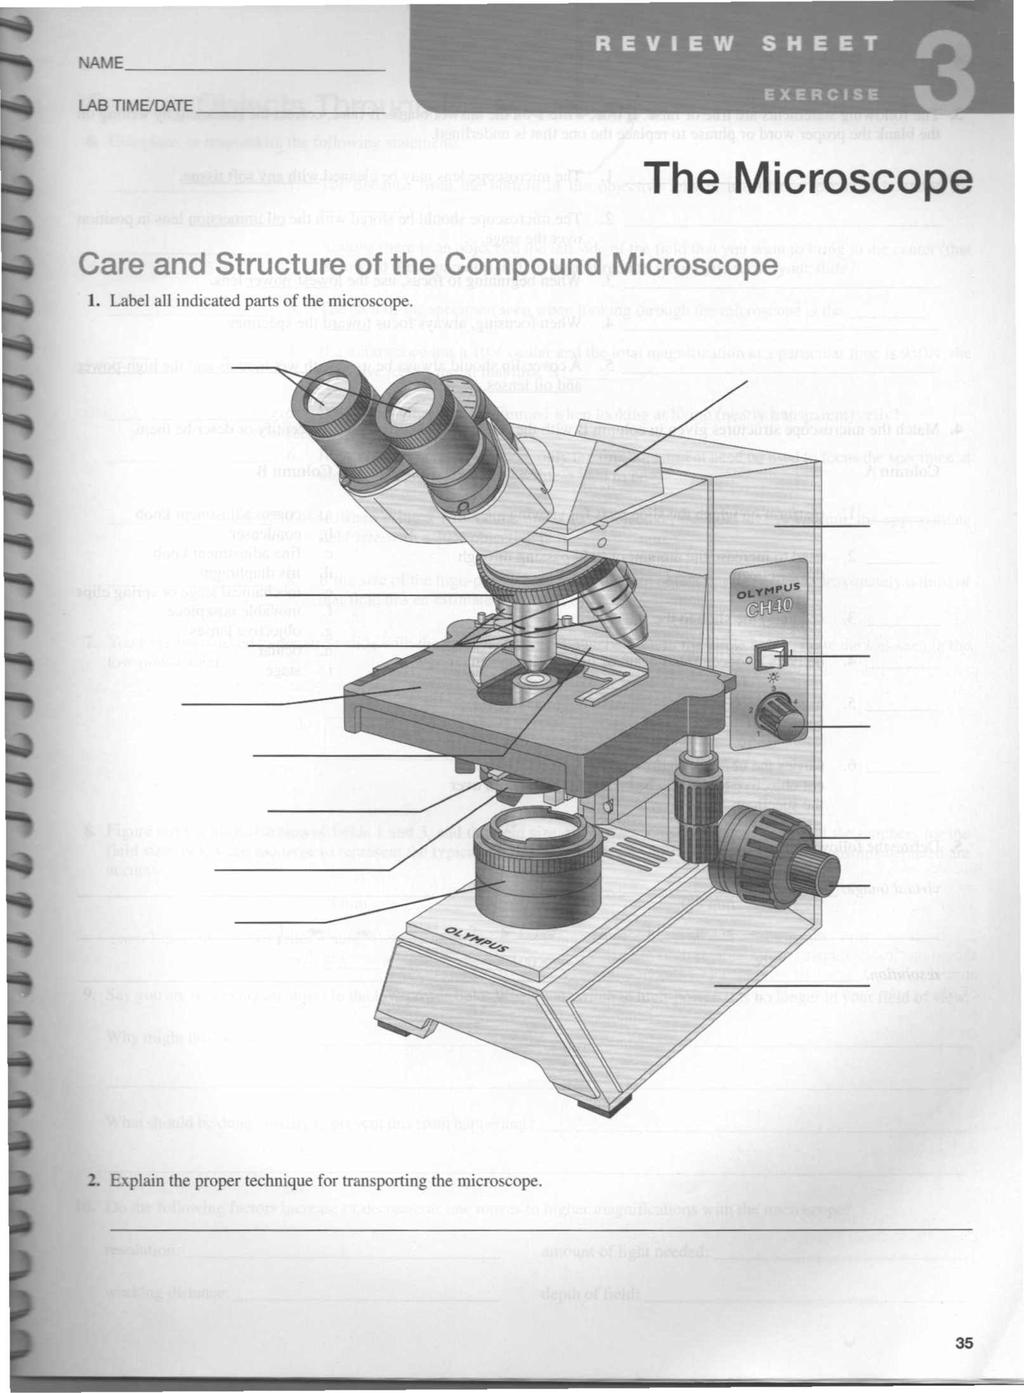 ~E LAB TIMEIDATE The Microscope Care and Structure of the Compound Microscope 1.